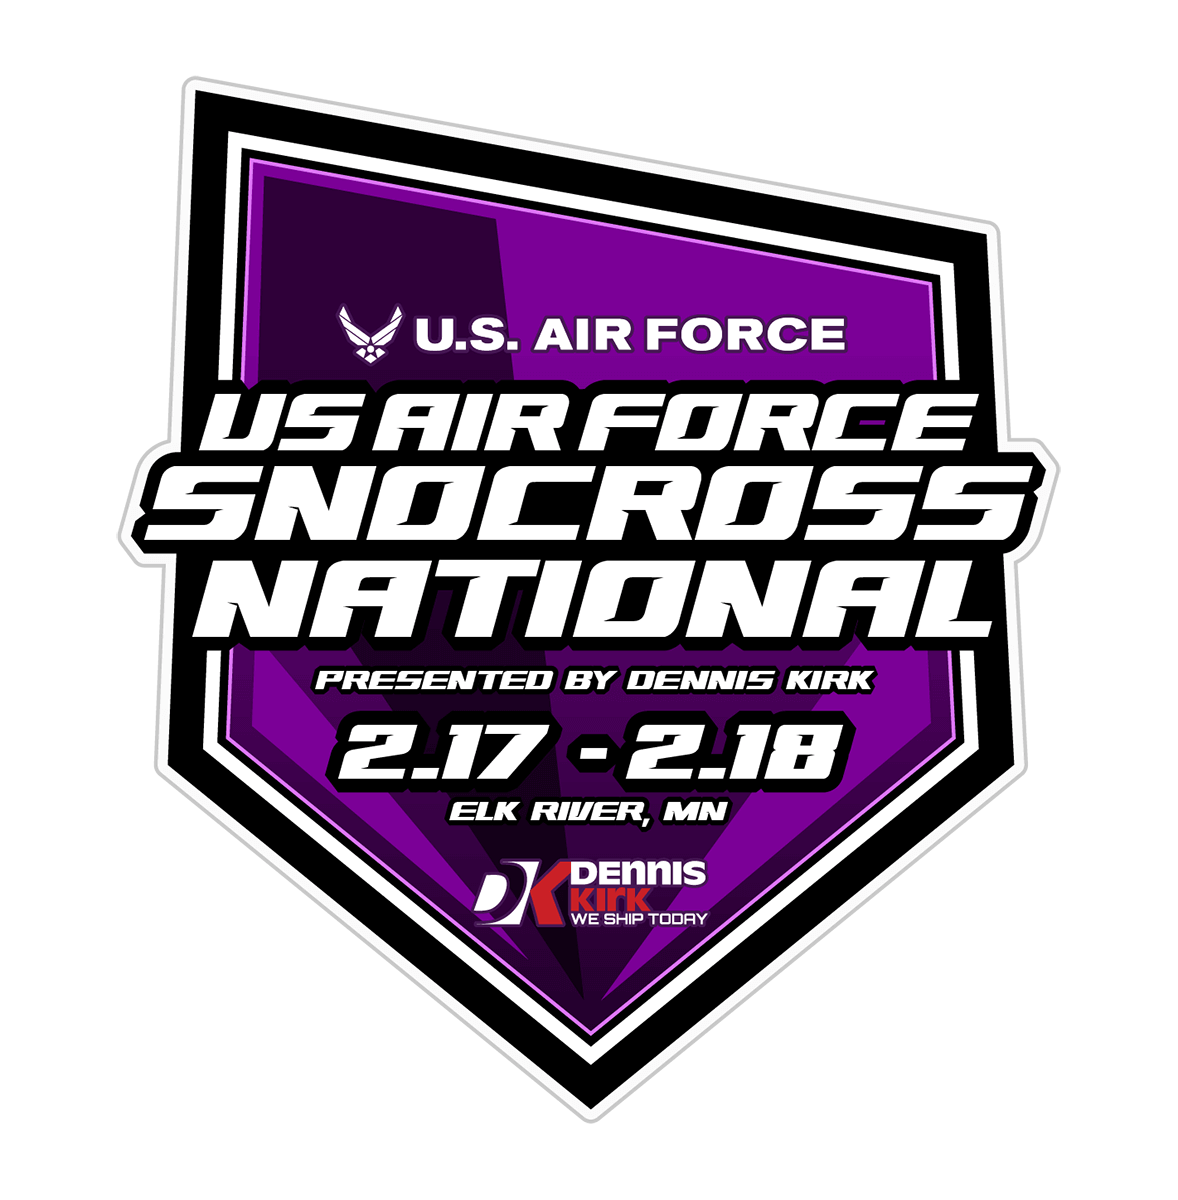 US AIR FORCE SNOCROSS NATIONAL